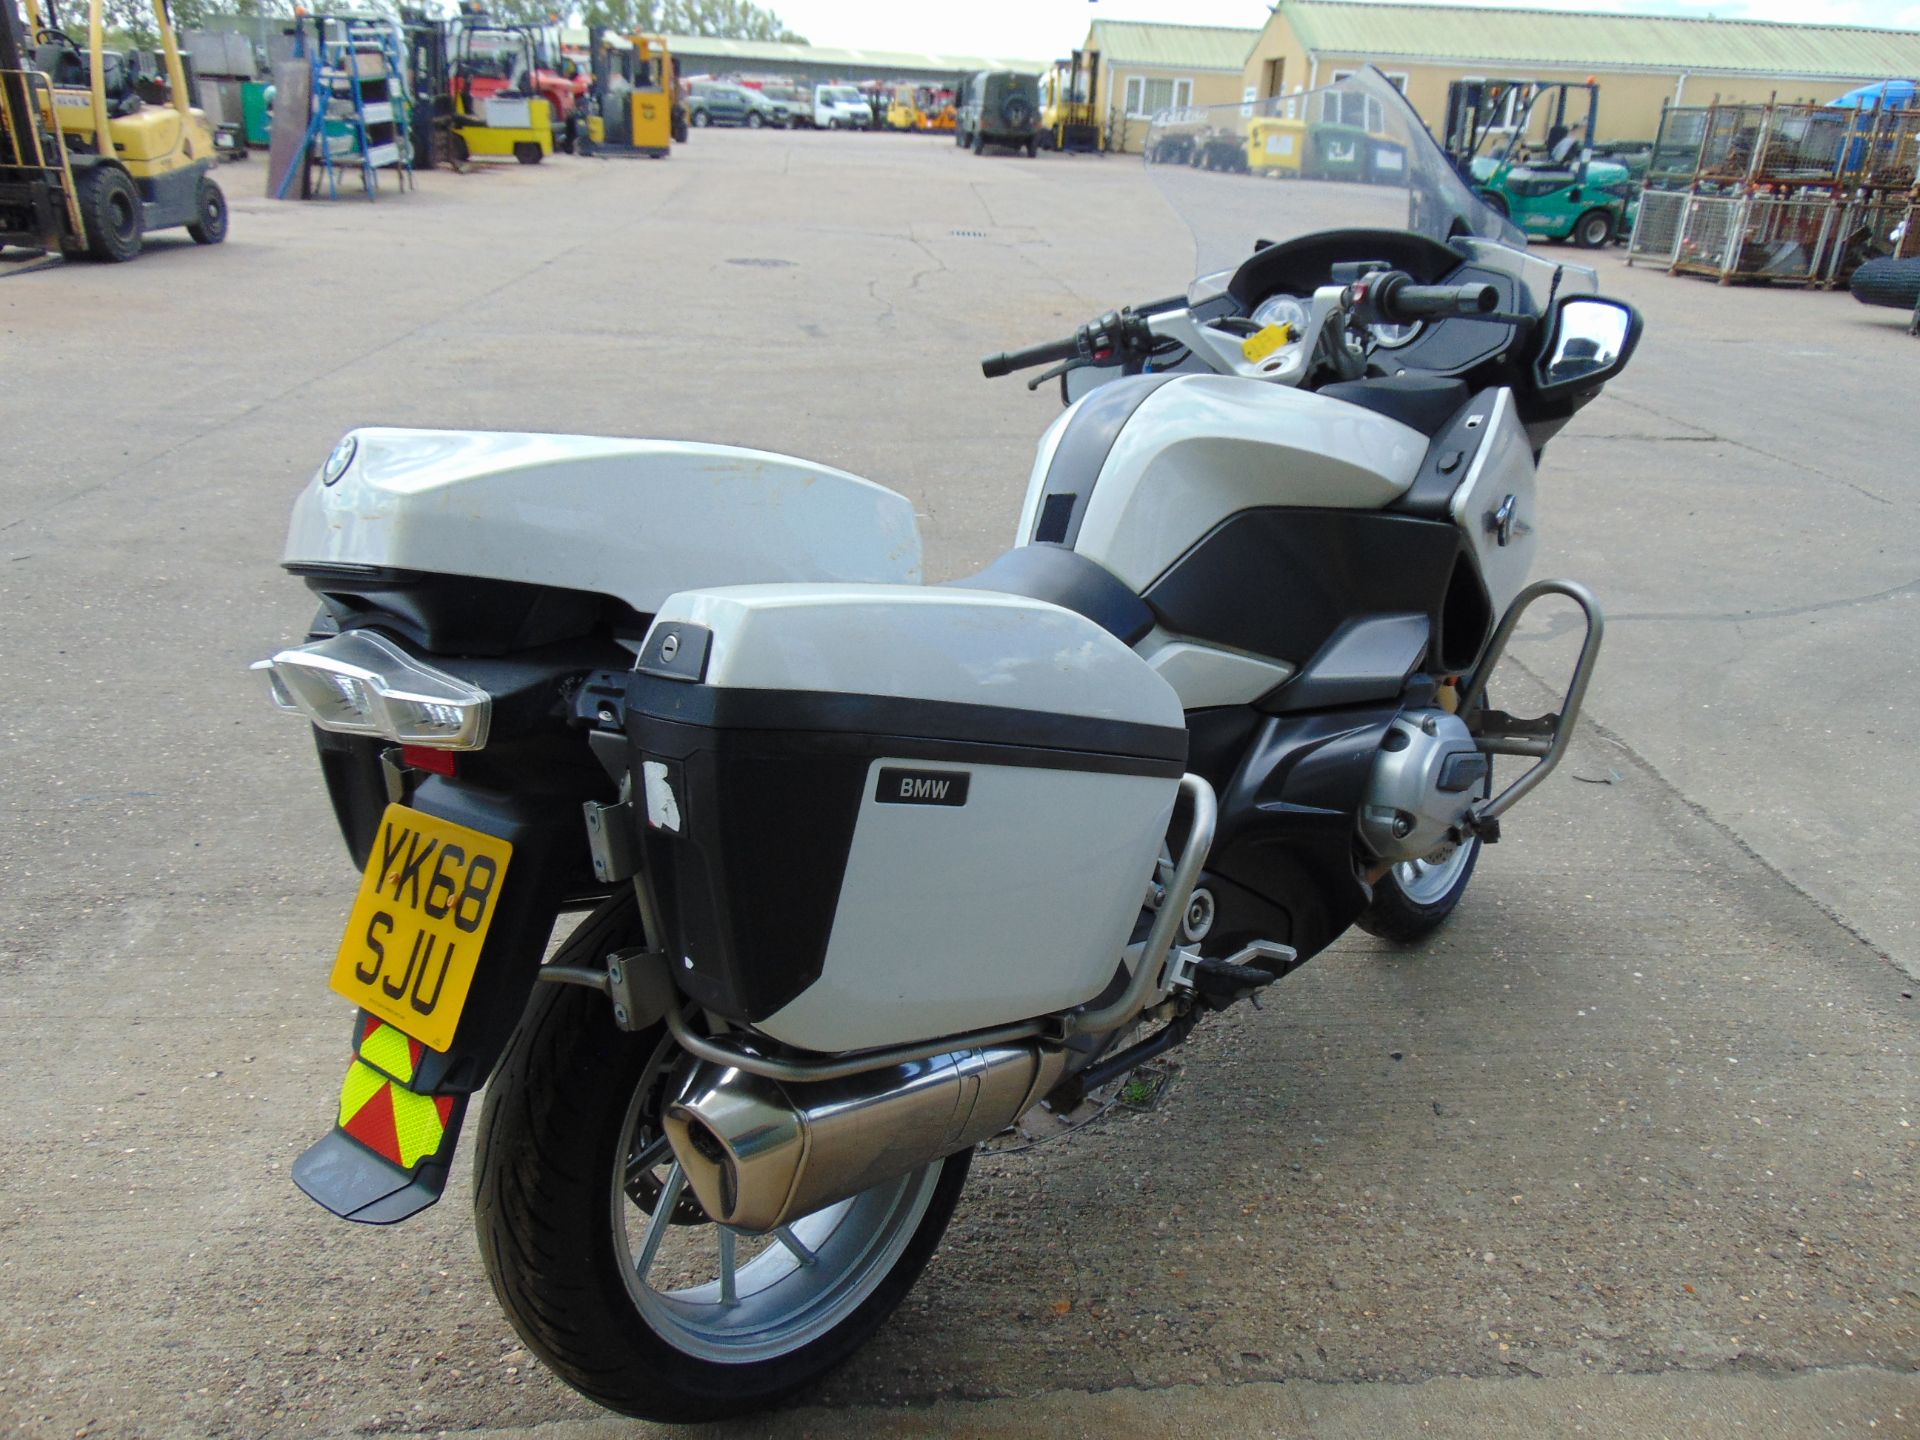 UK Police a 1 Owner 2019 BMW R1200RT Motorbike - Image 9 of 20